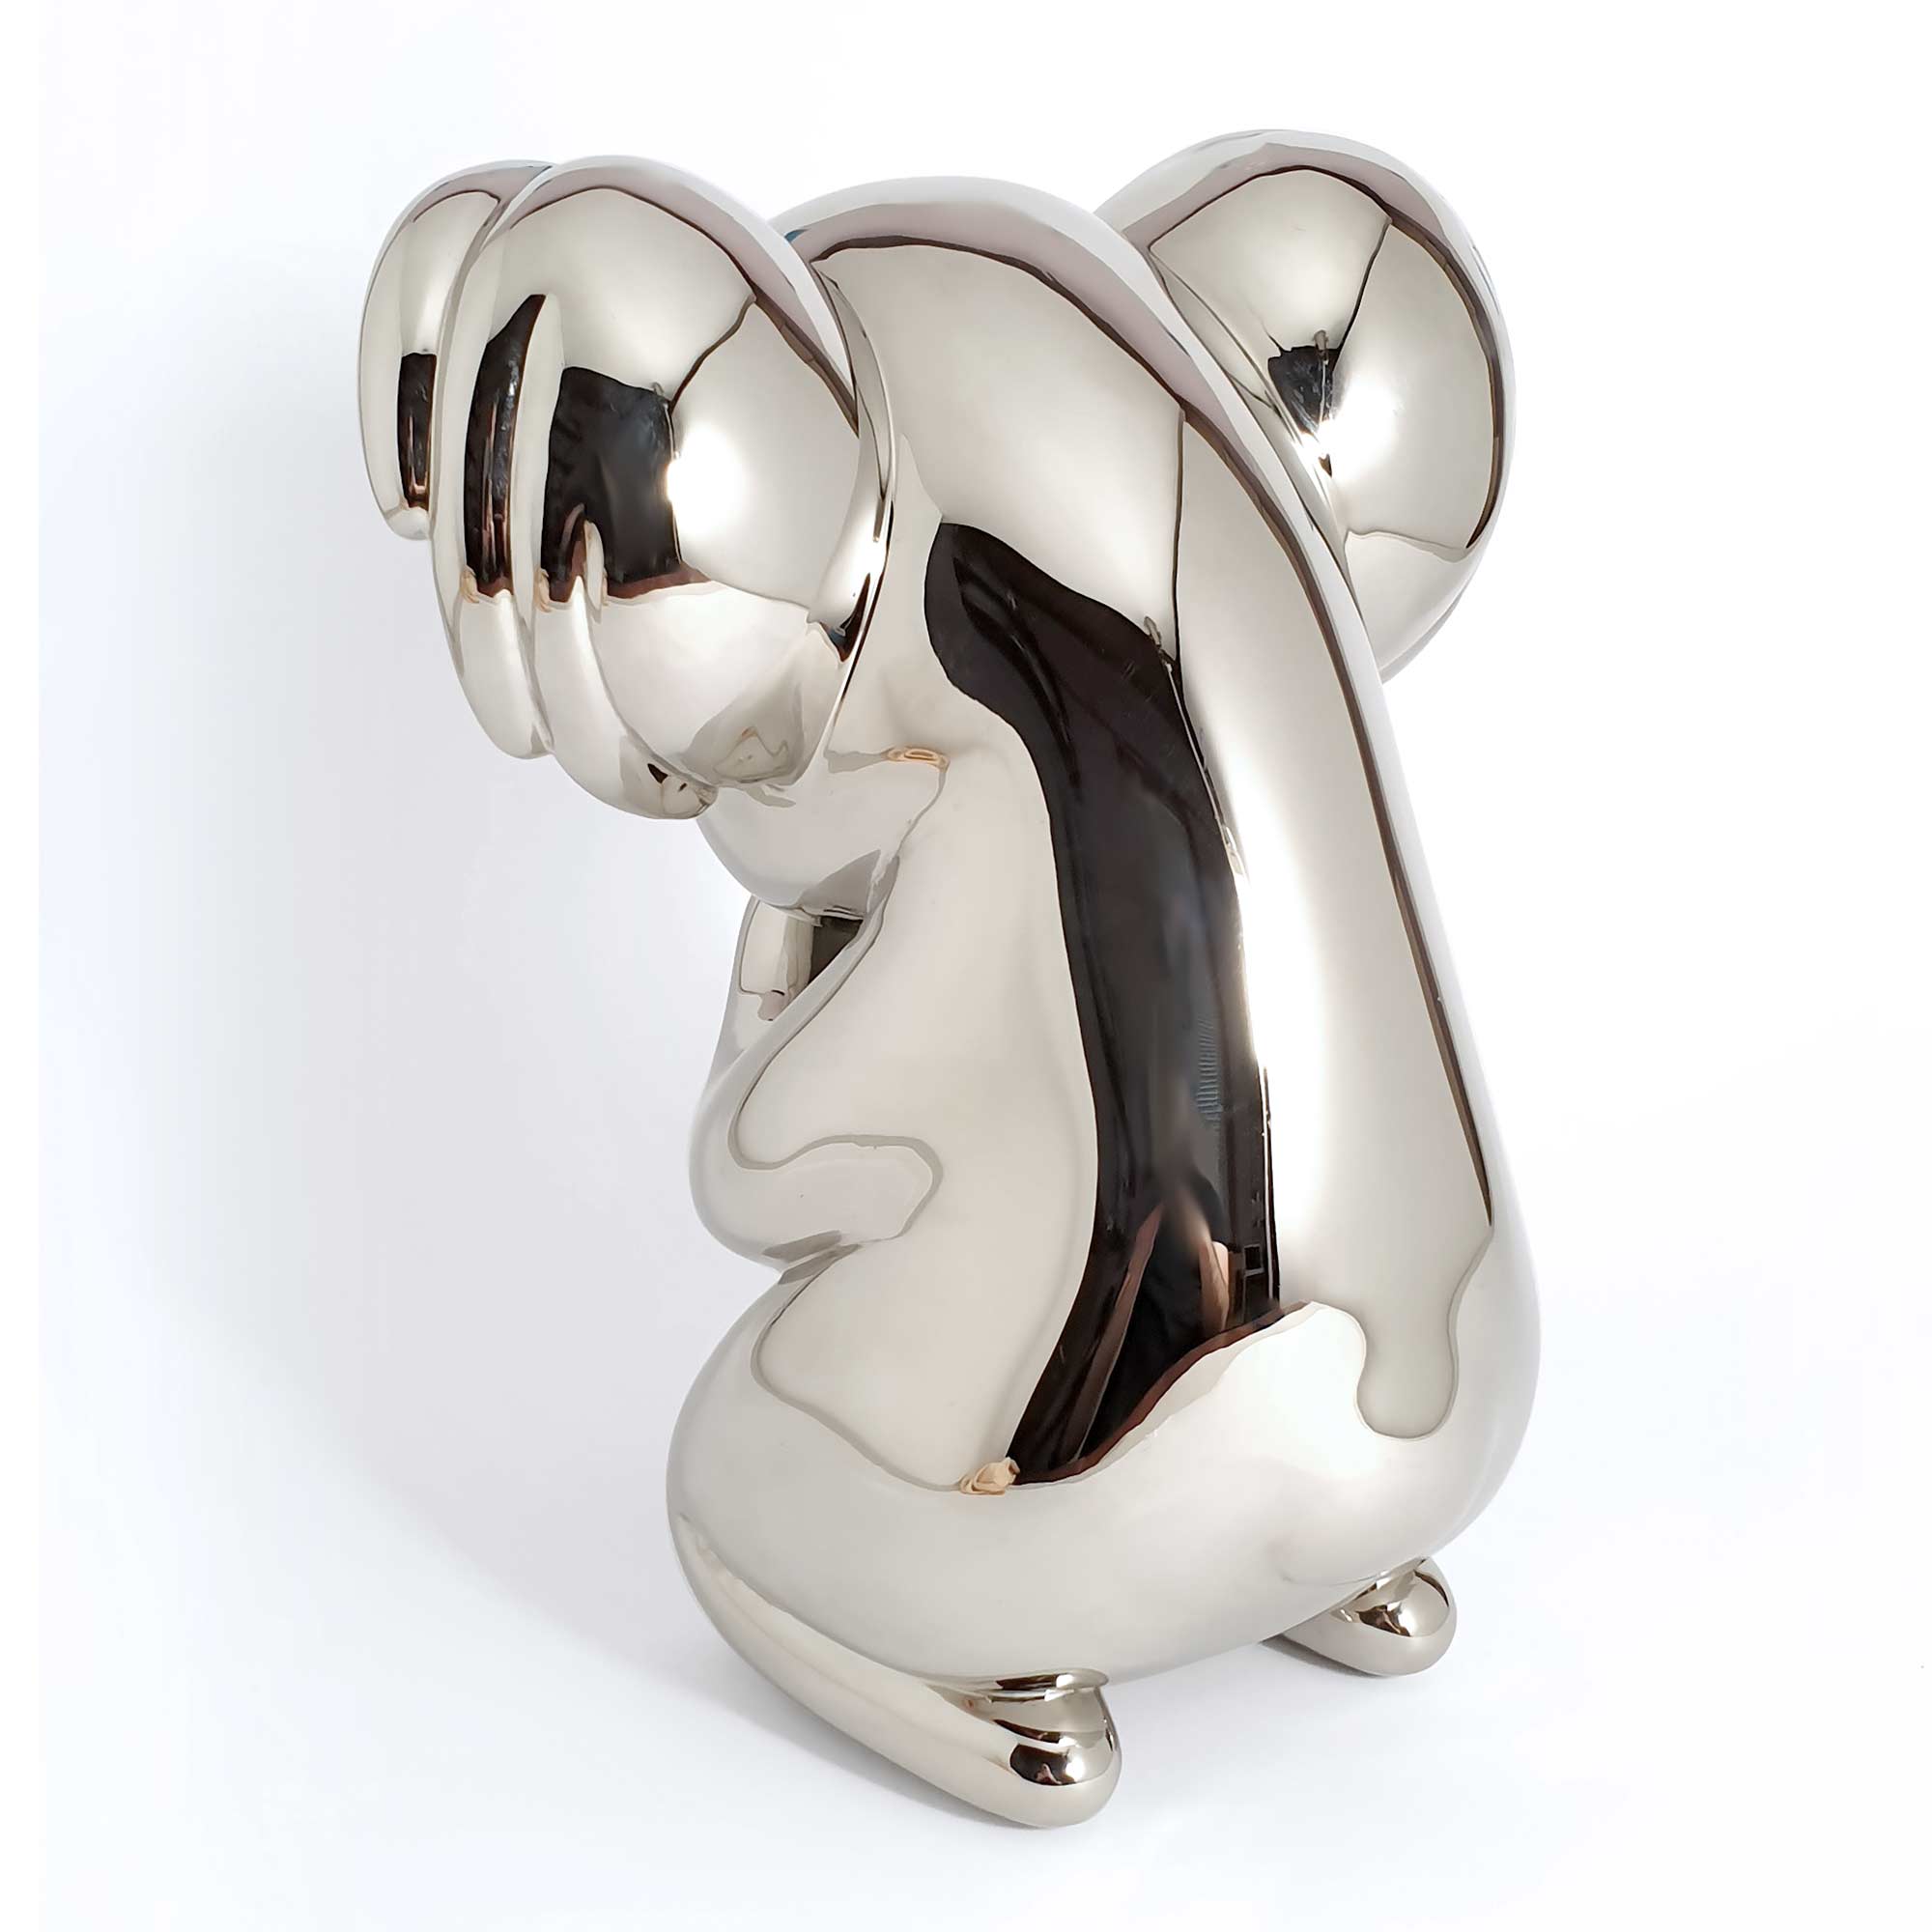 Koala “What else to do?” sculpture, Mirror Polished Stainless Steel Sculpture, by artist Ferdi B Dick, back 2 view